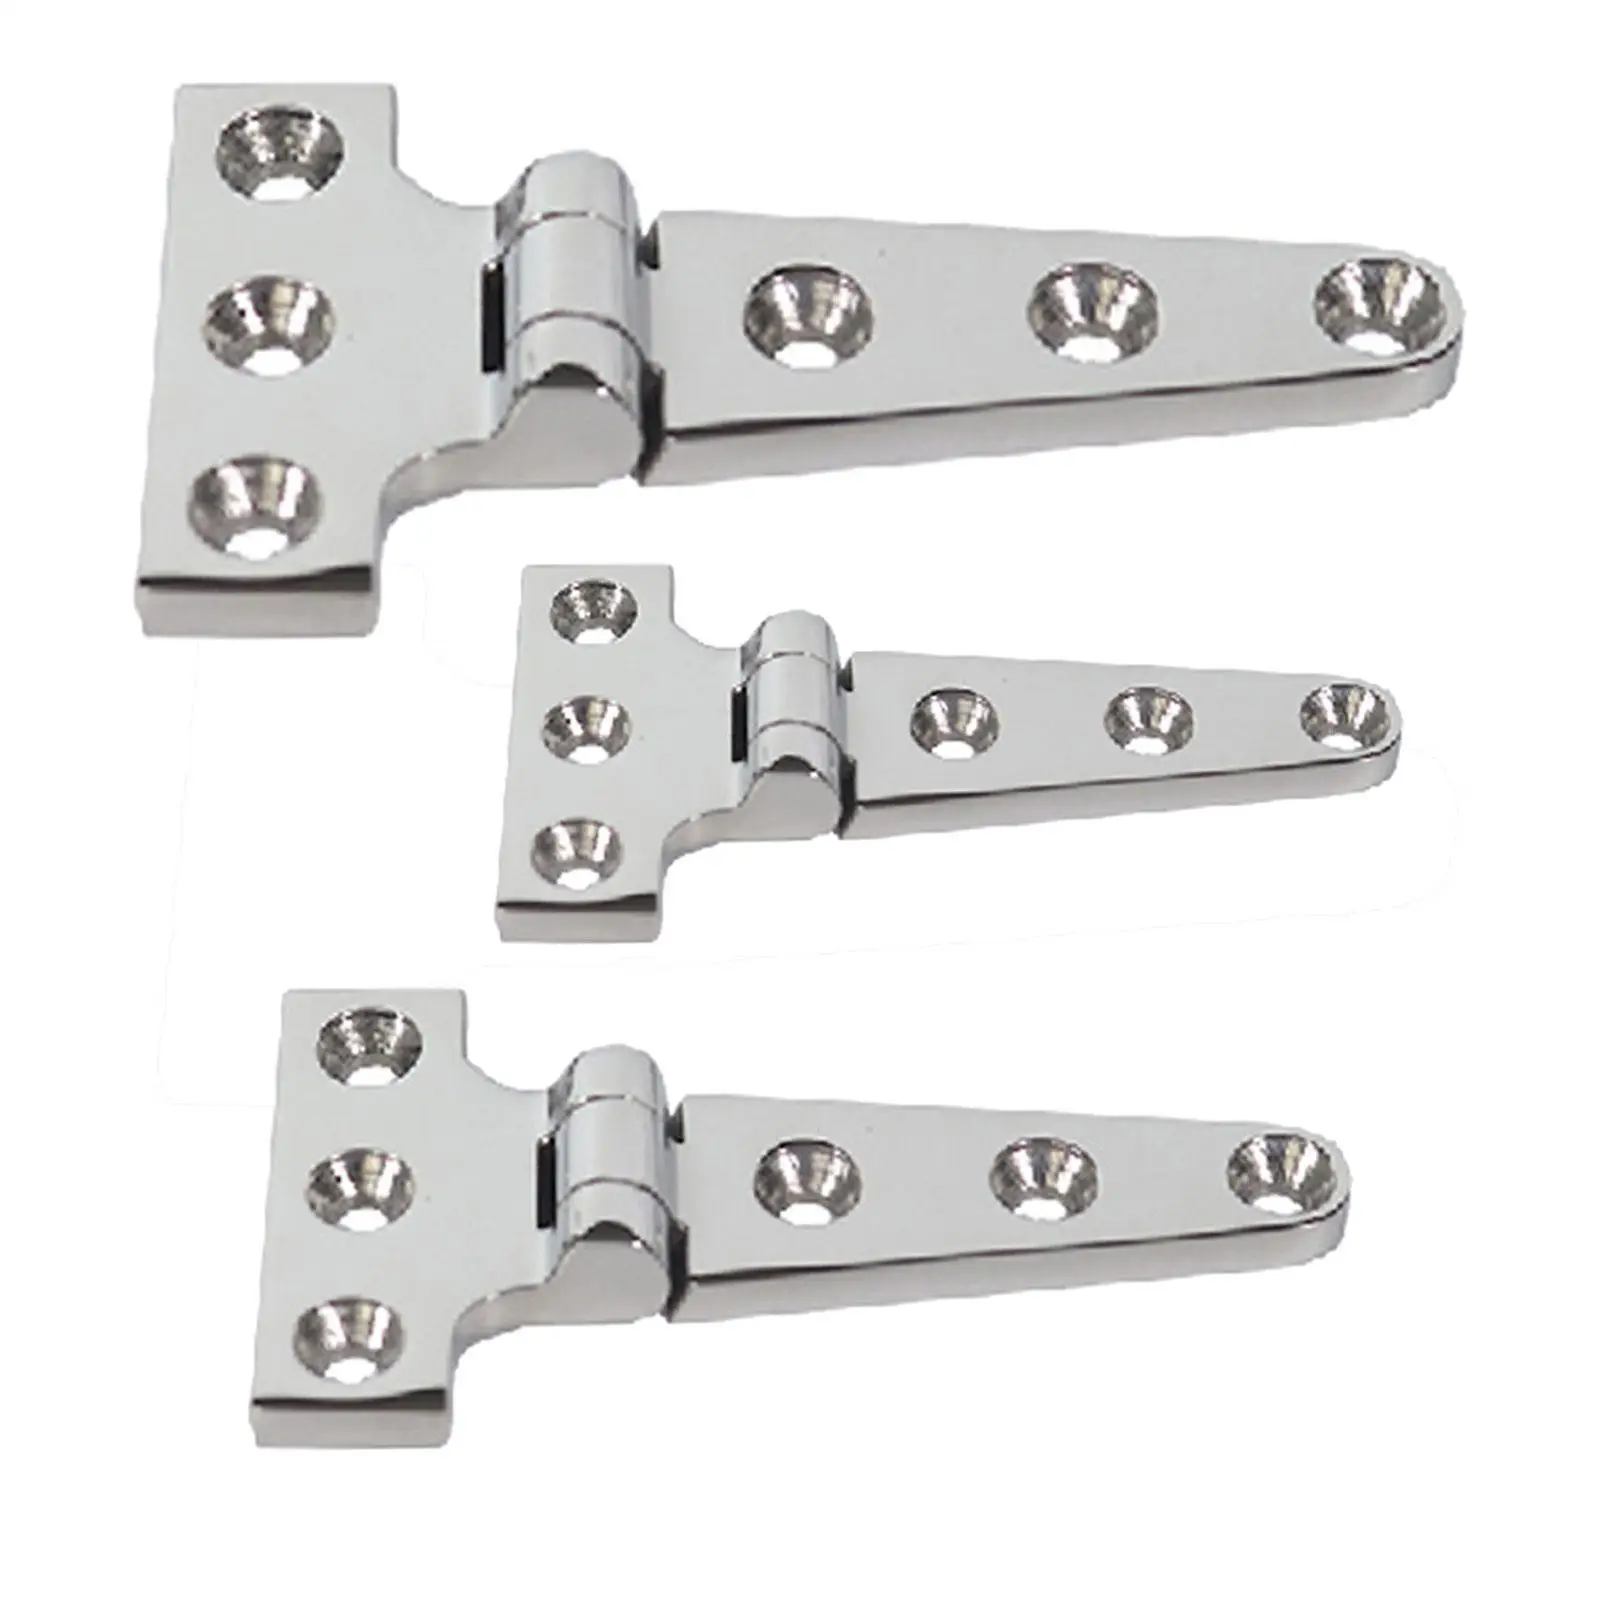 Marine Grade T Hinges 316 Stainless Steel Boat Hinge Easily Install Polished